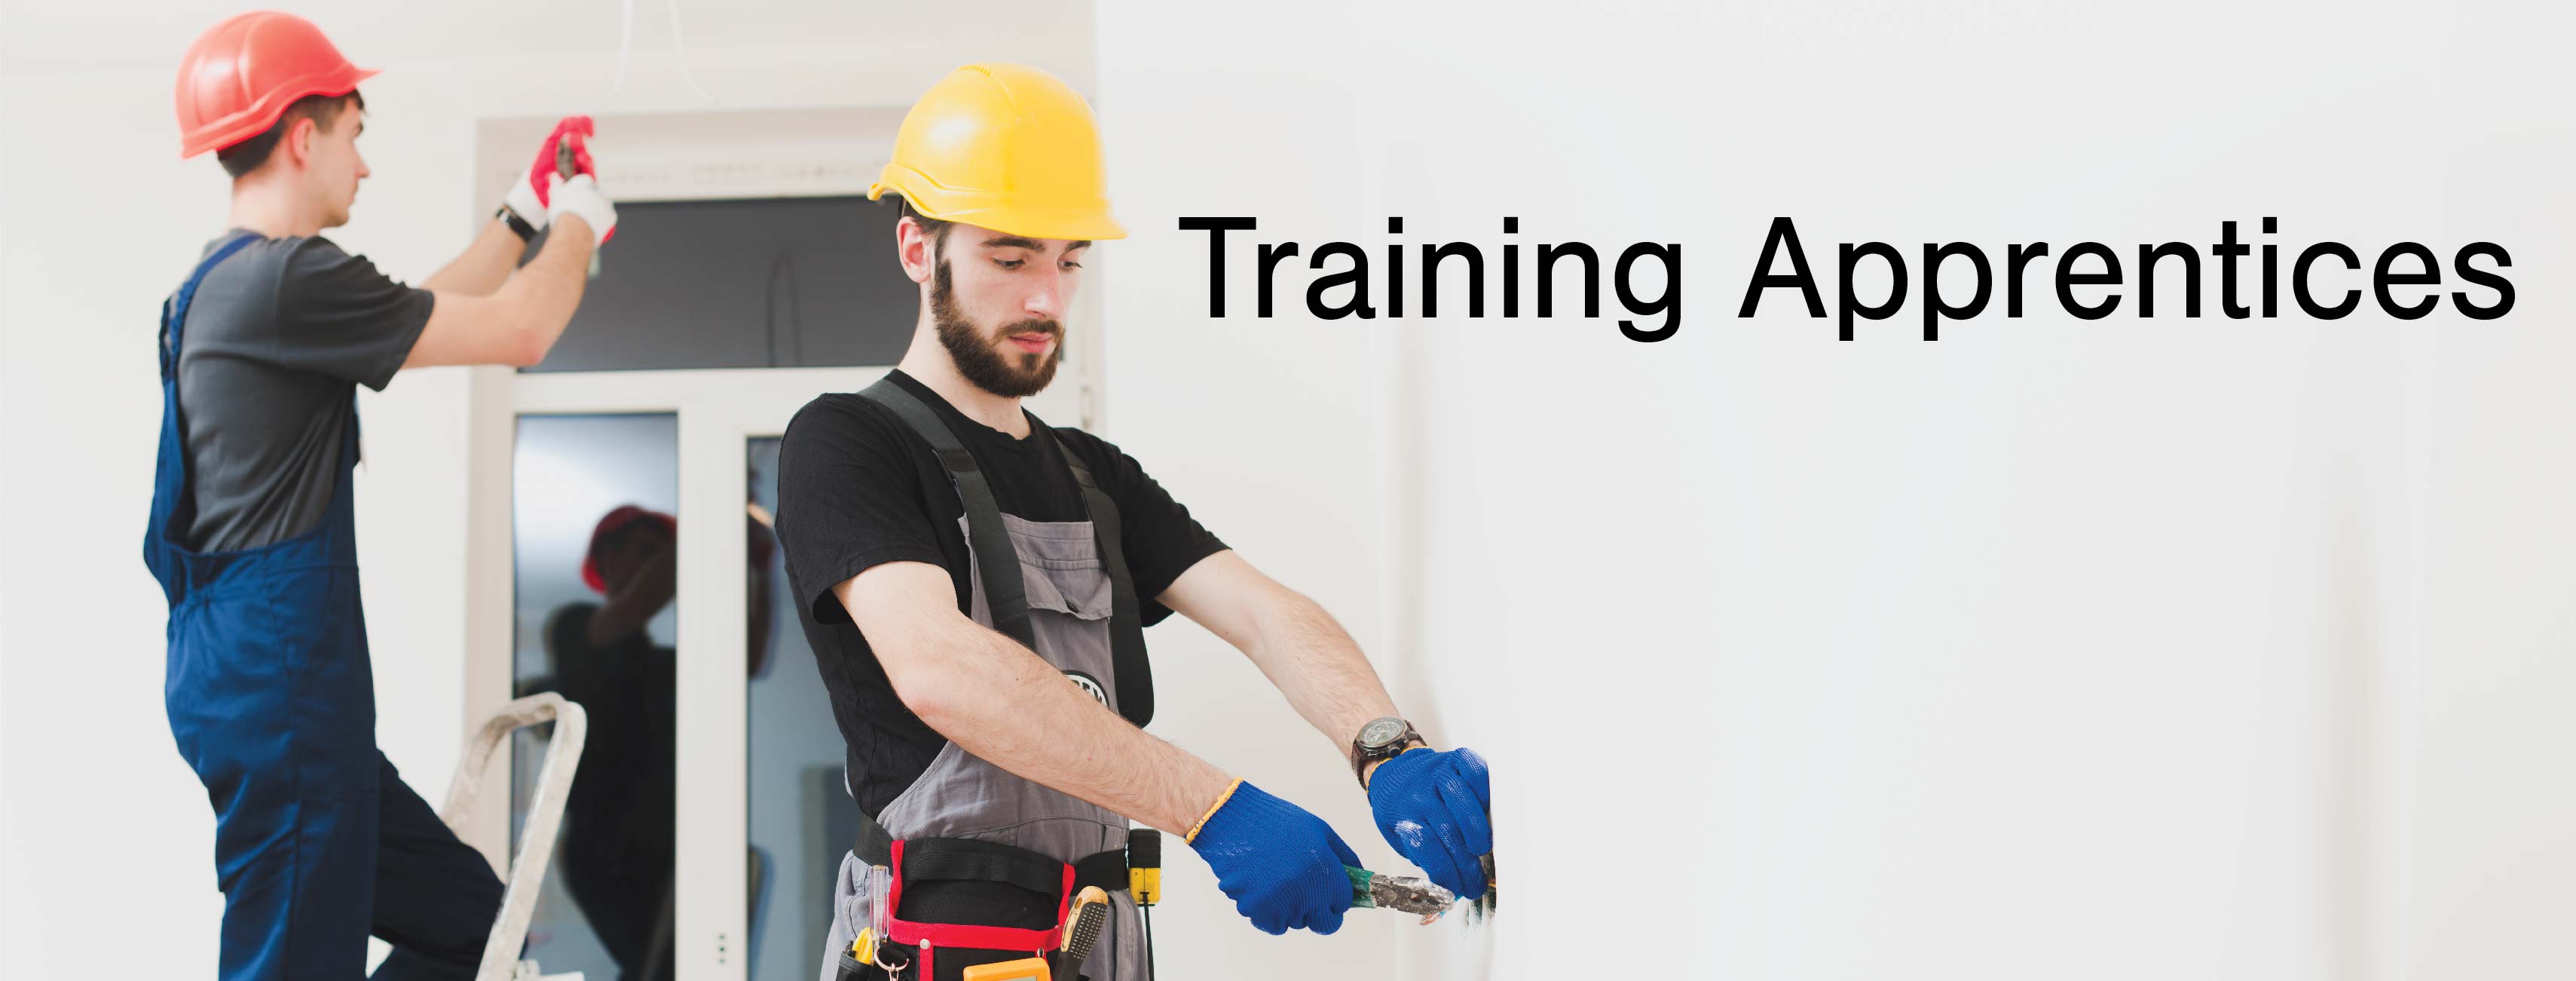 Training Apprentices to be Productive and Reliable